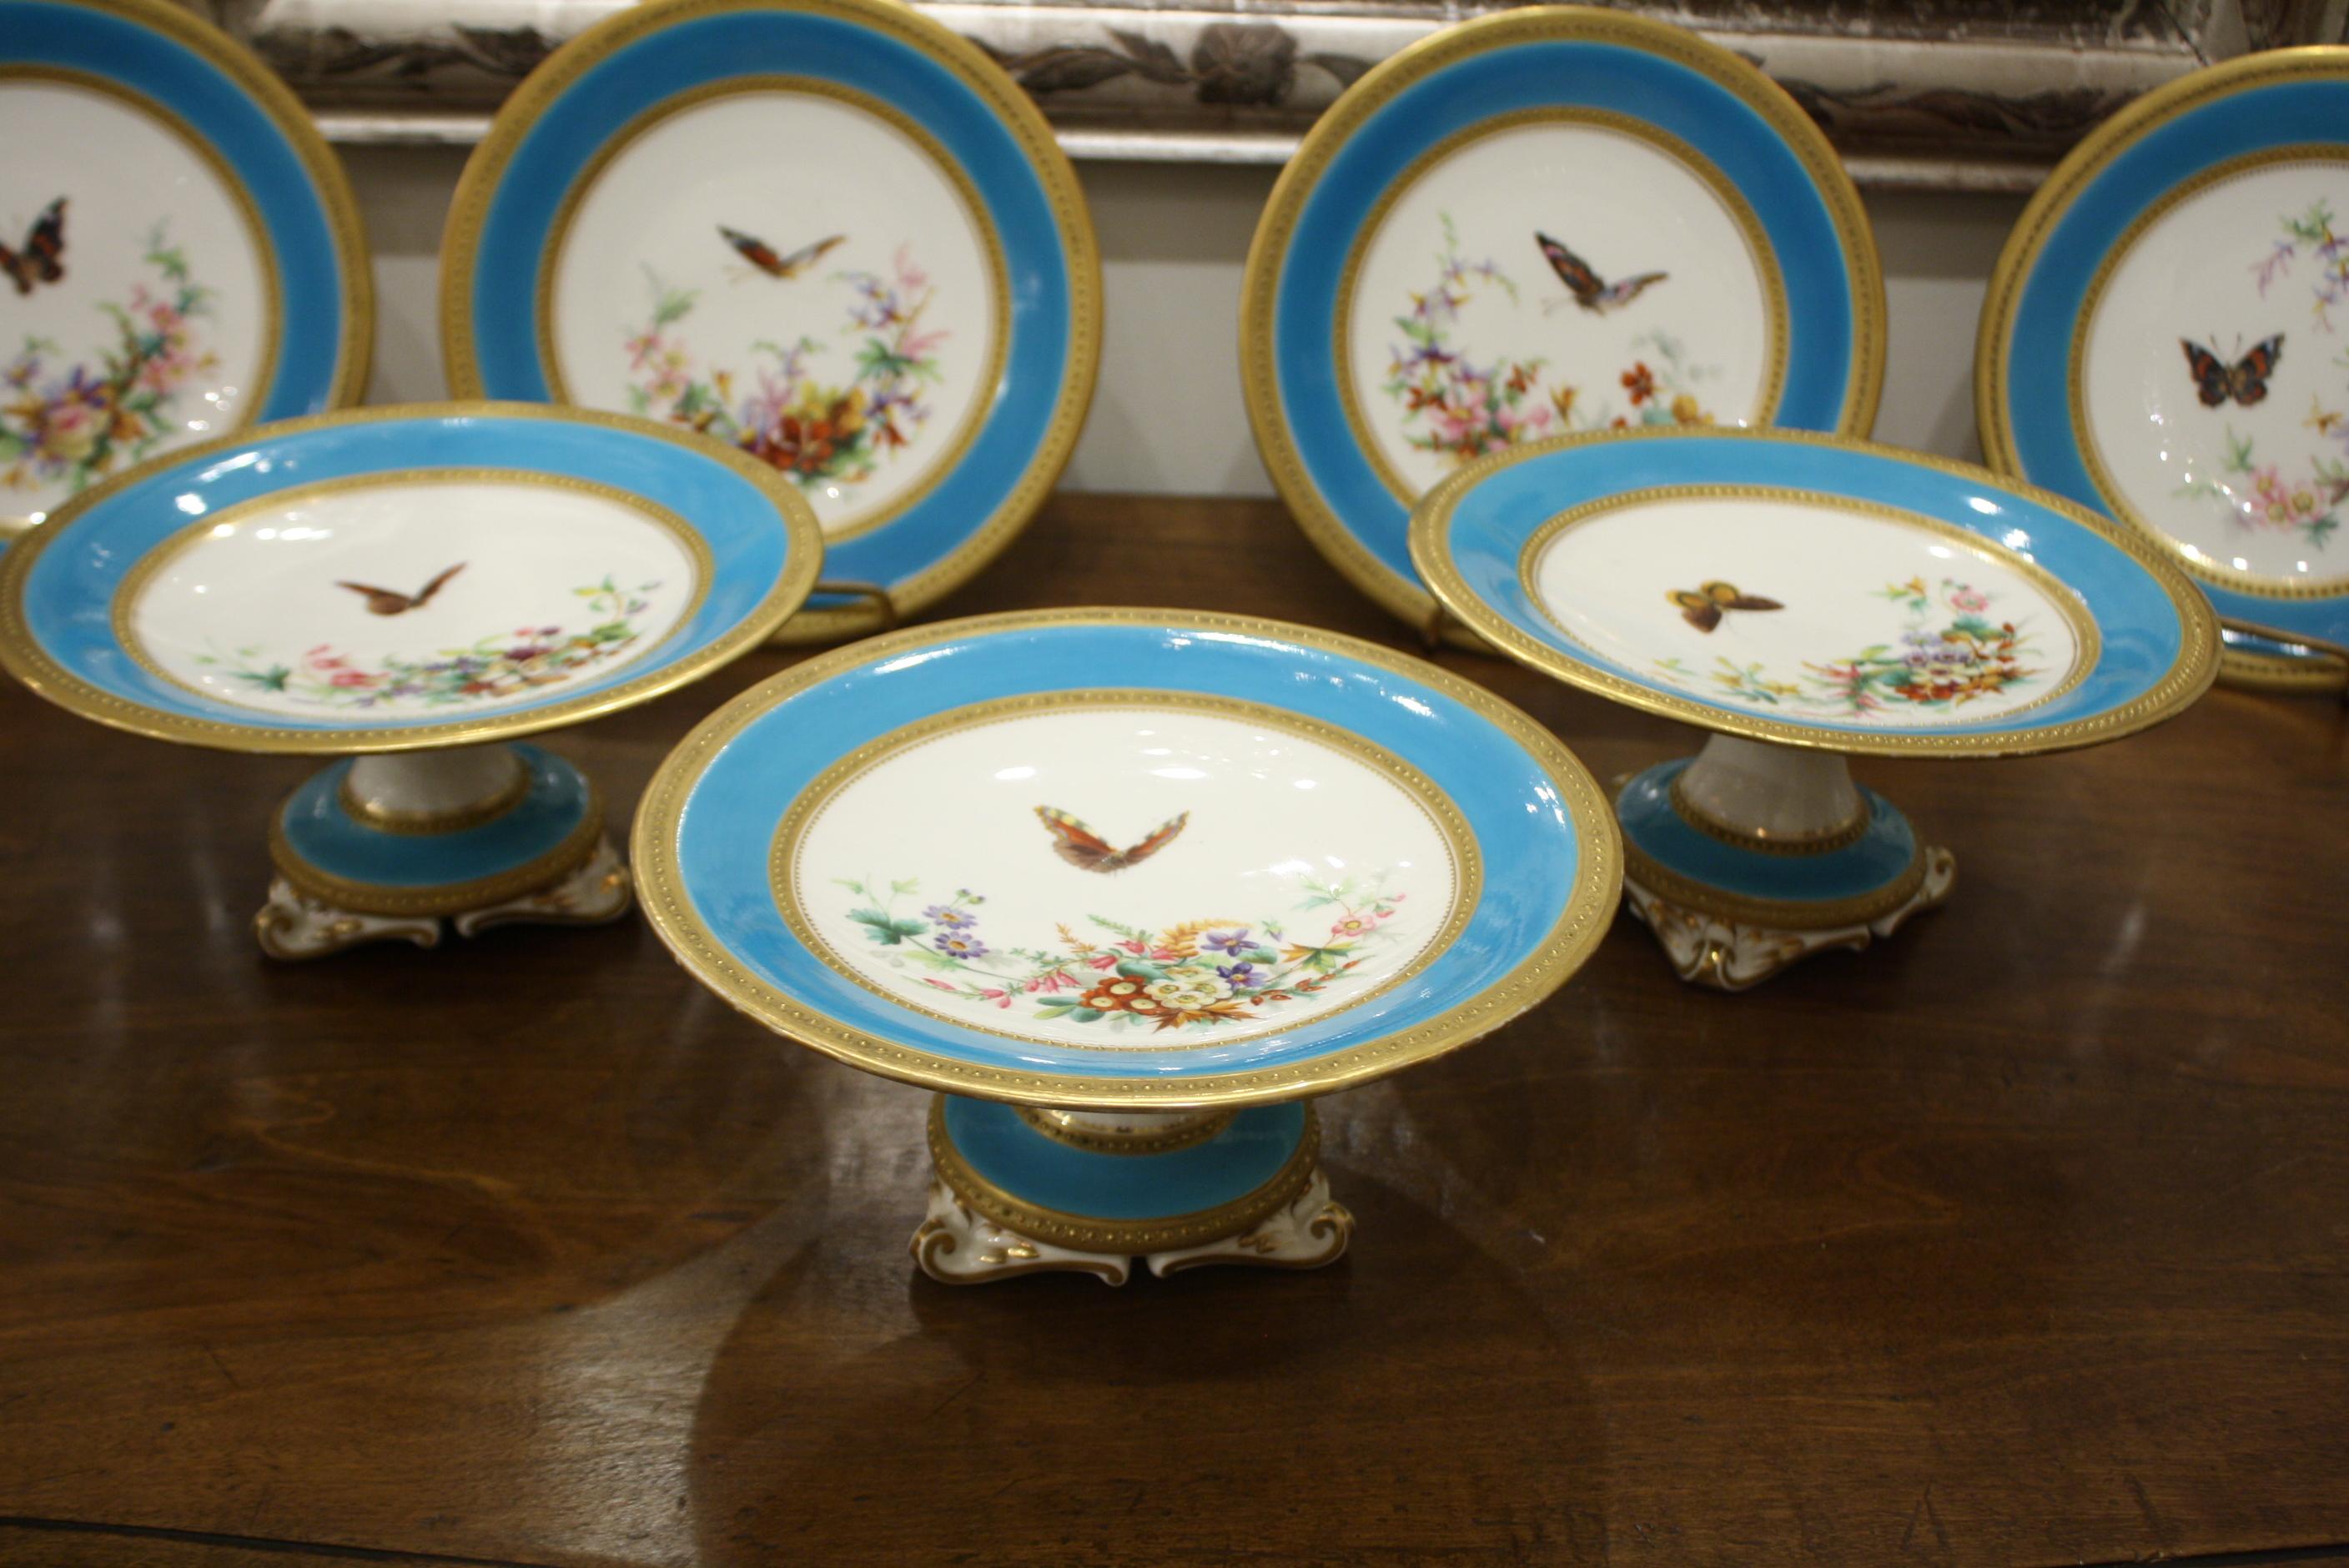 Victorian Minton Dessert Service with Butterflies and Flowers and Gold Rims For Sale